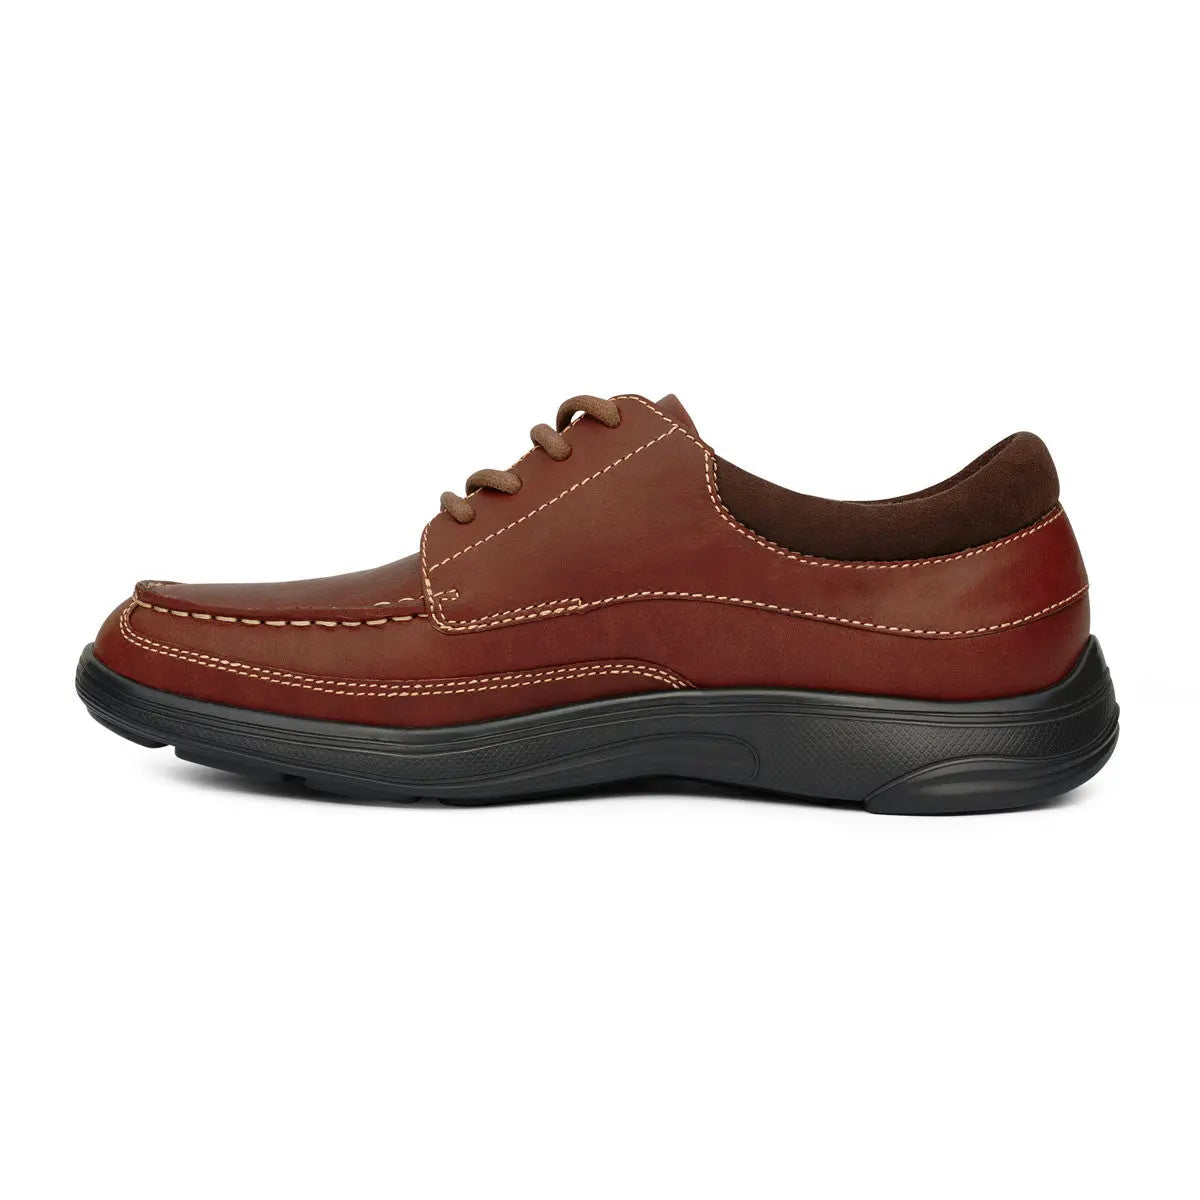 Anodyne Men's No.30 Casual Dress Diabetic Shoe, Whiskey with microfiber lining